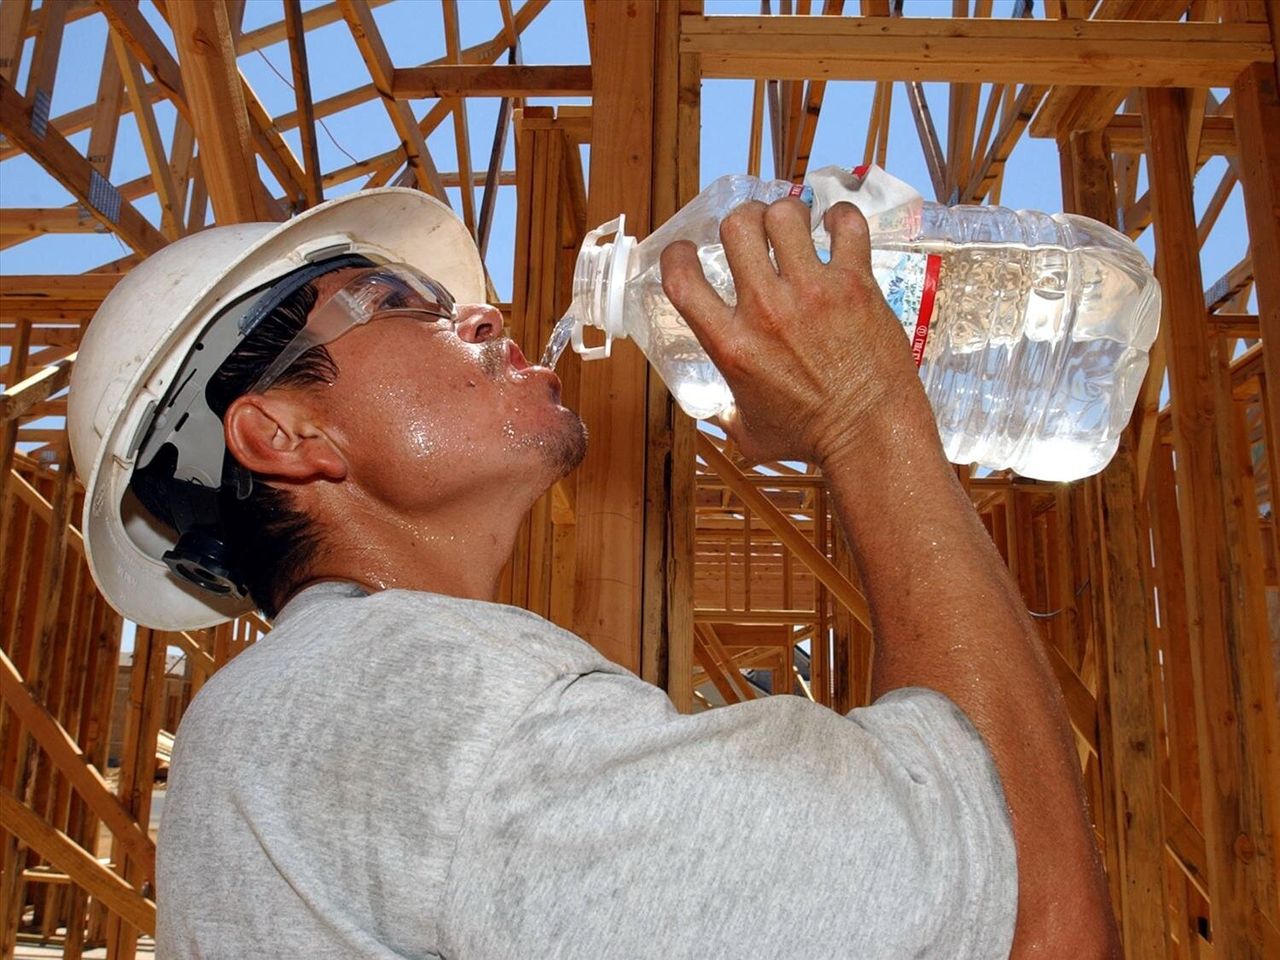 A construction worker drinks a bottle of water while working on a site in Rancho Cordova, California.